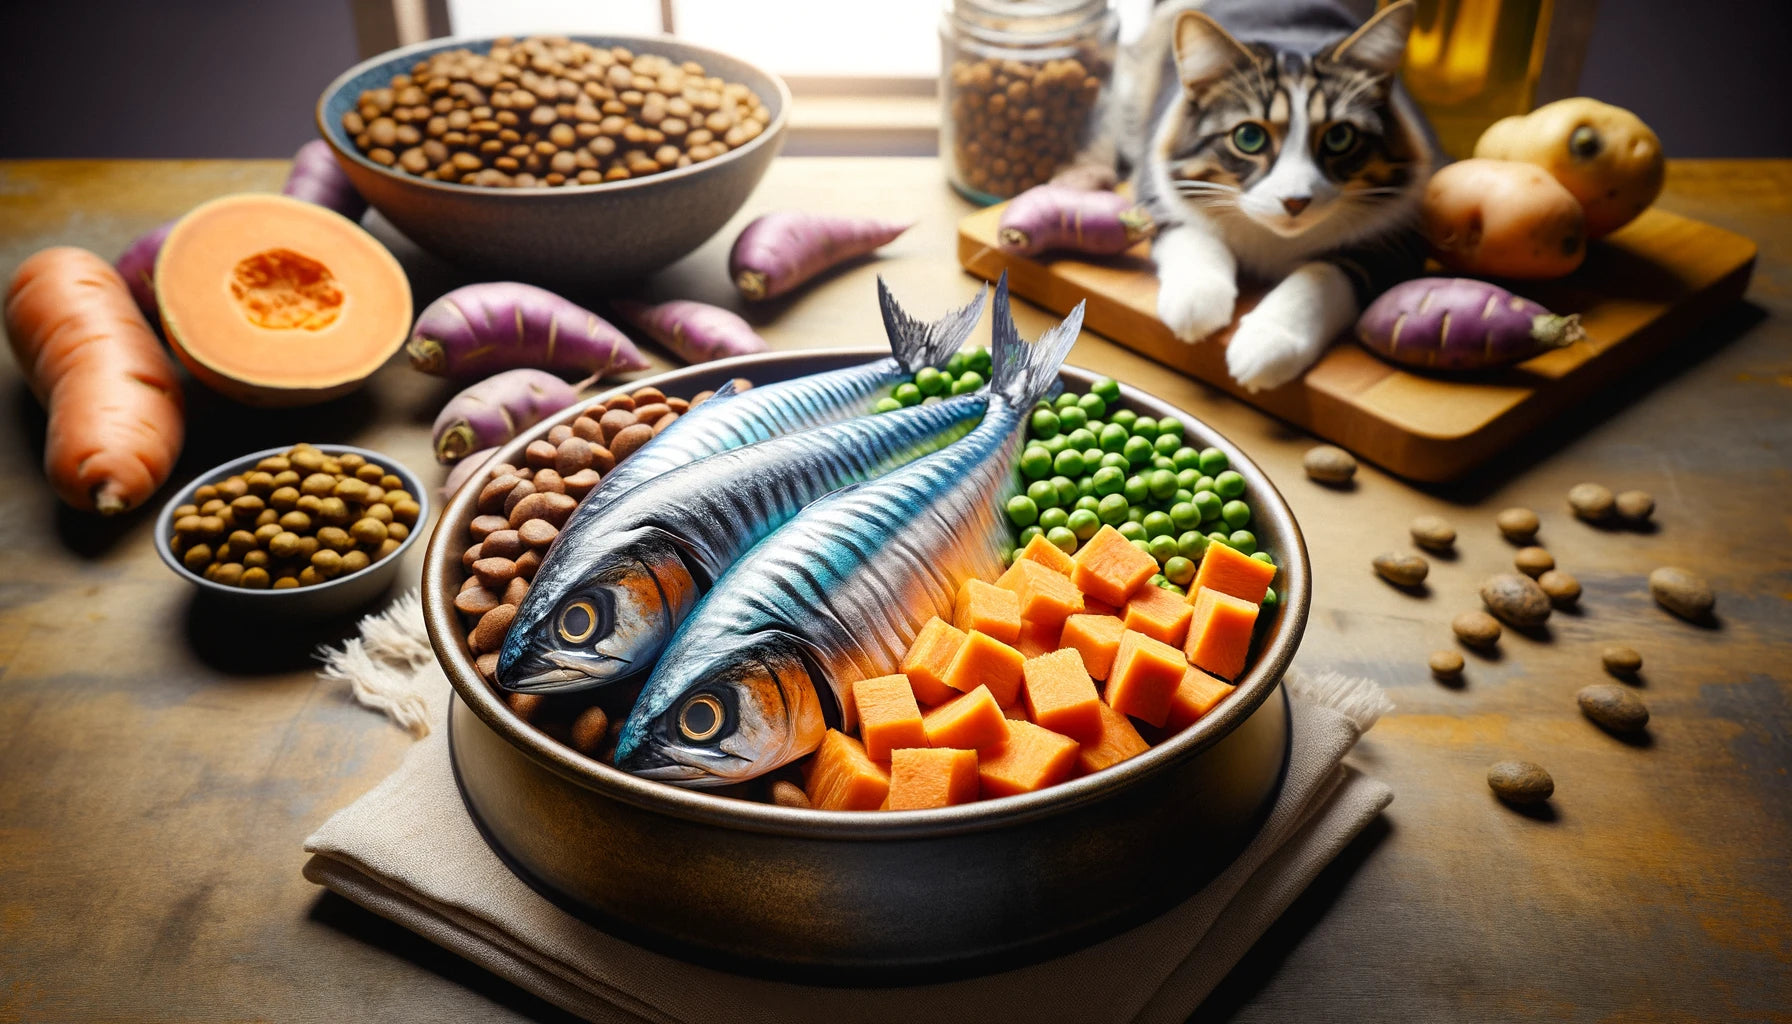 Fish Fiesta showcasing a nutritious blend of sardines or salmon, sweet potatoes, and peas.